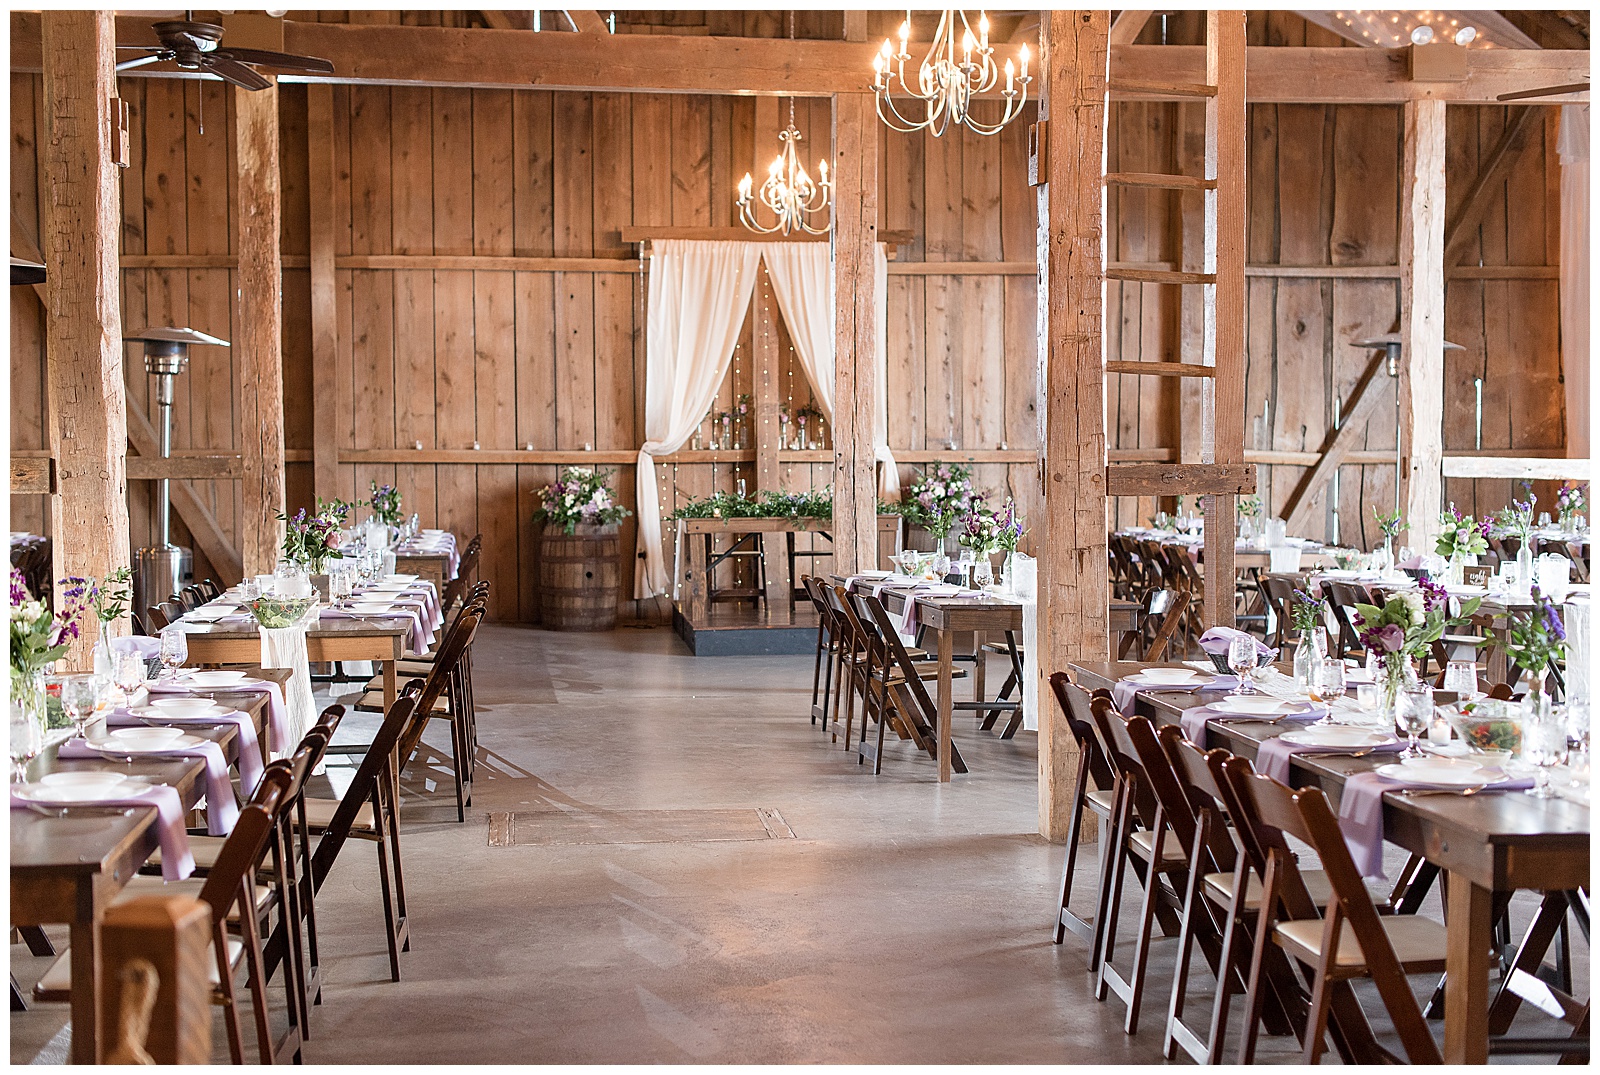 stunning rustic barn indoor reception area with exposed wooden beams and chandeliers at Stoltzfus Homestead and Gardens